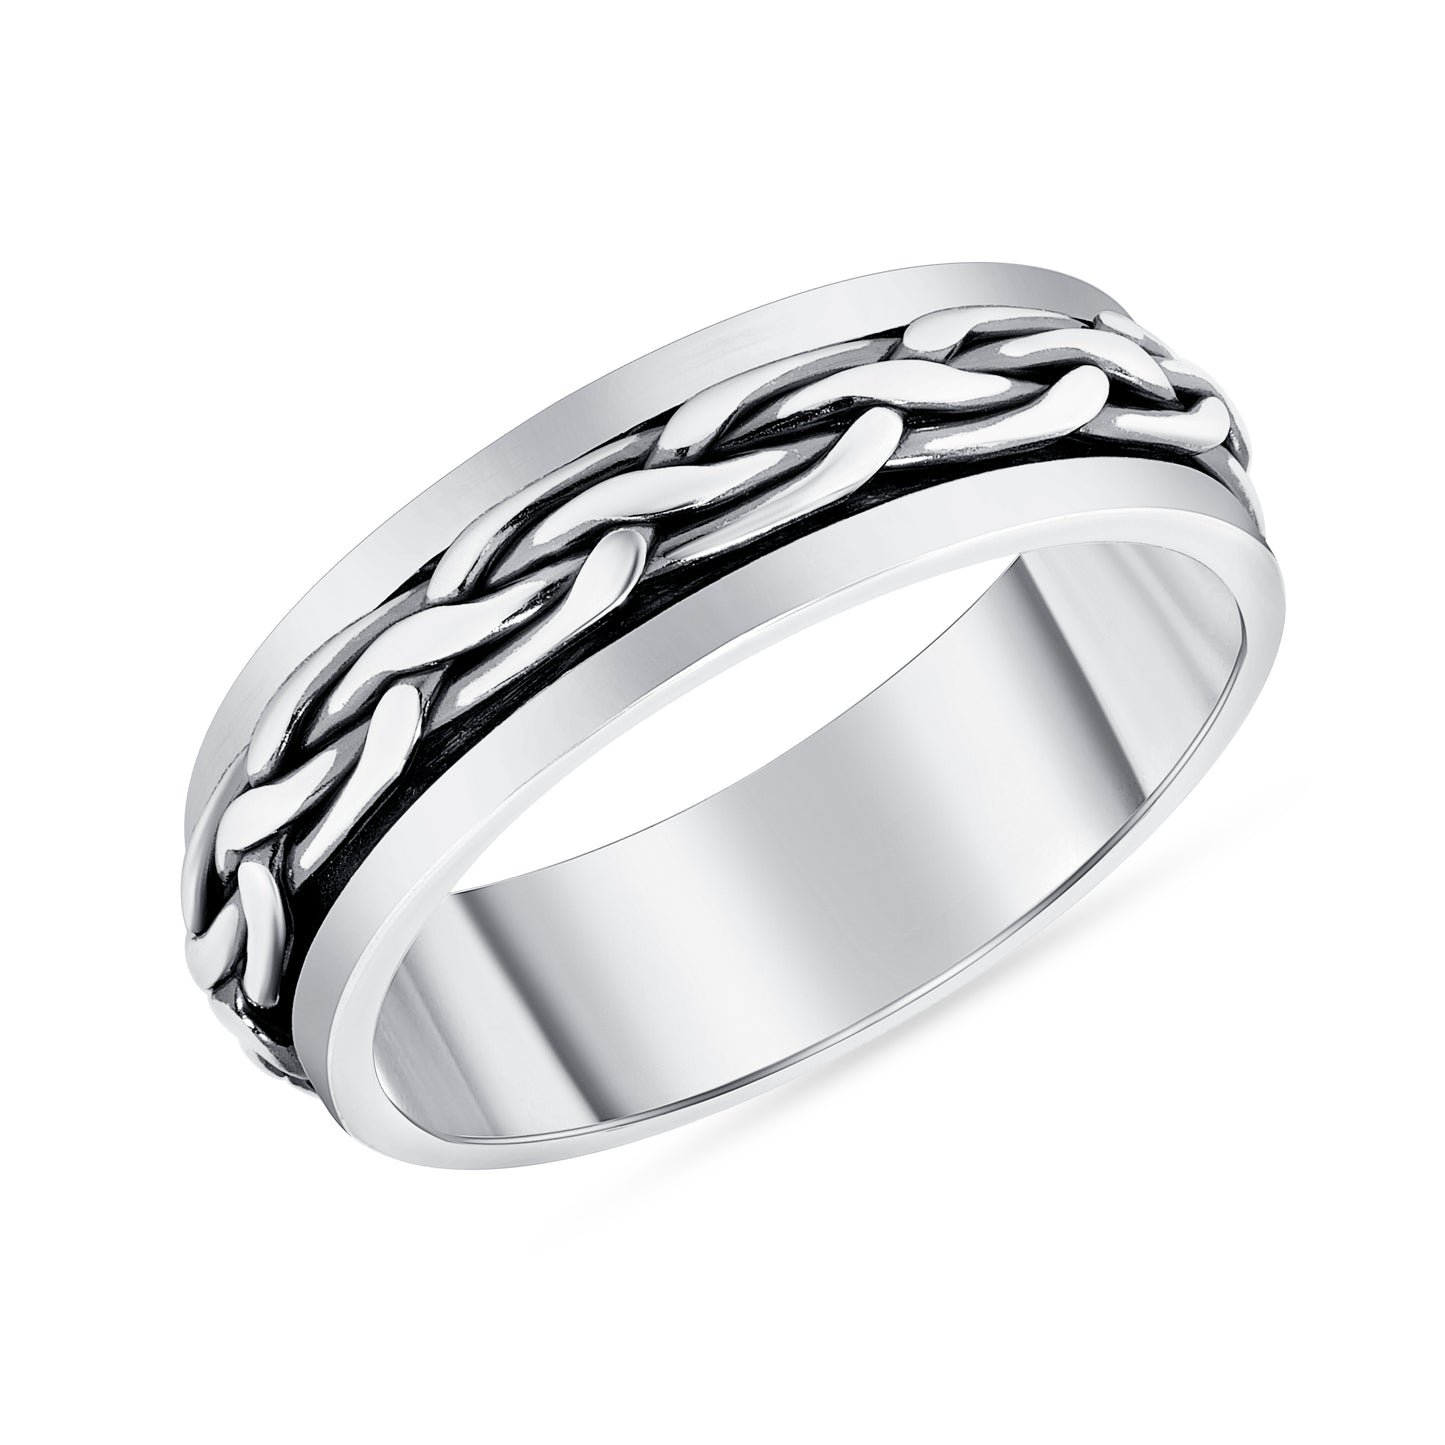 Silver 925 Braided Spinning Oxidized Ring. R71010189